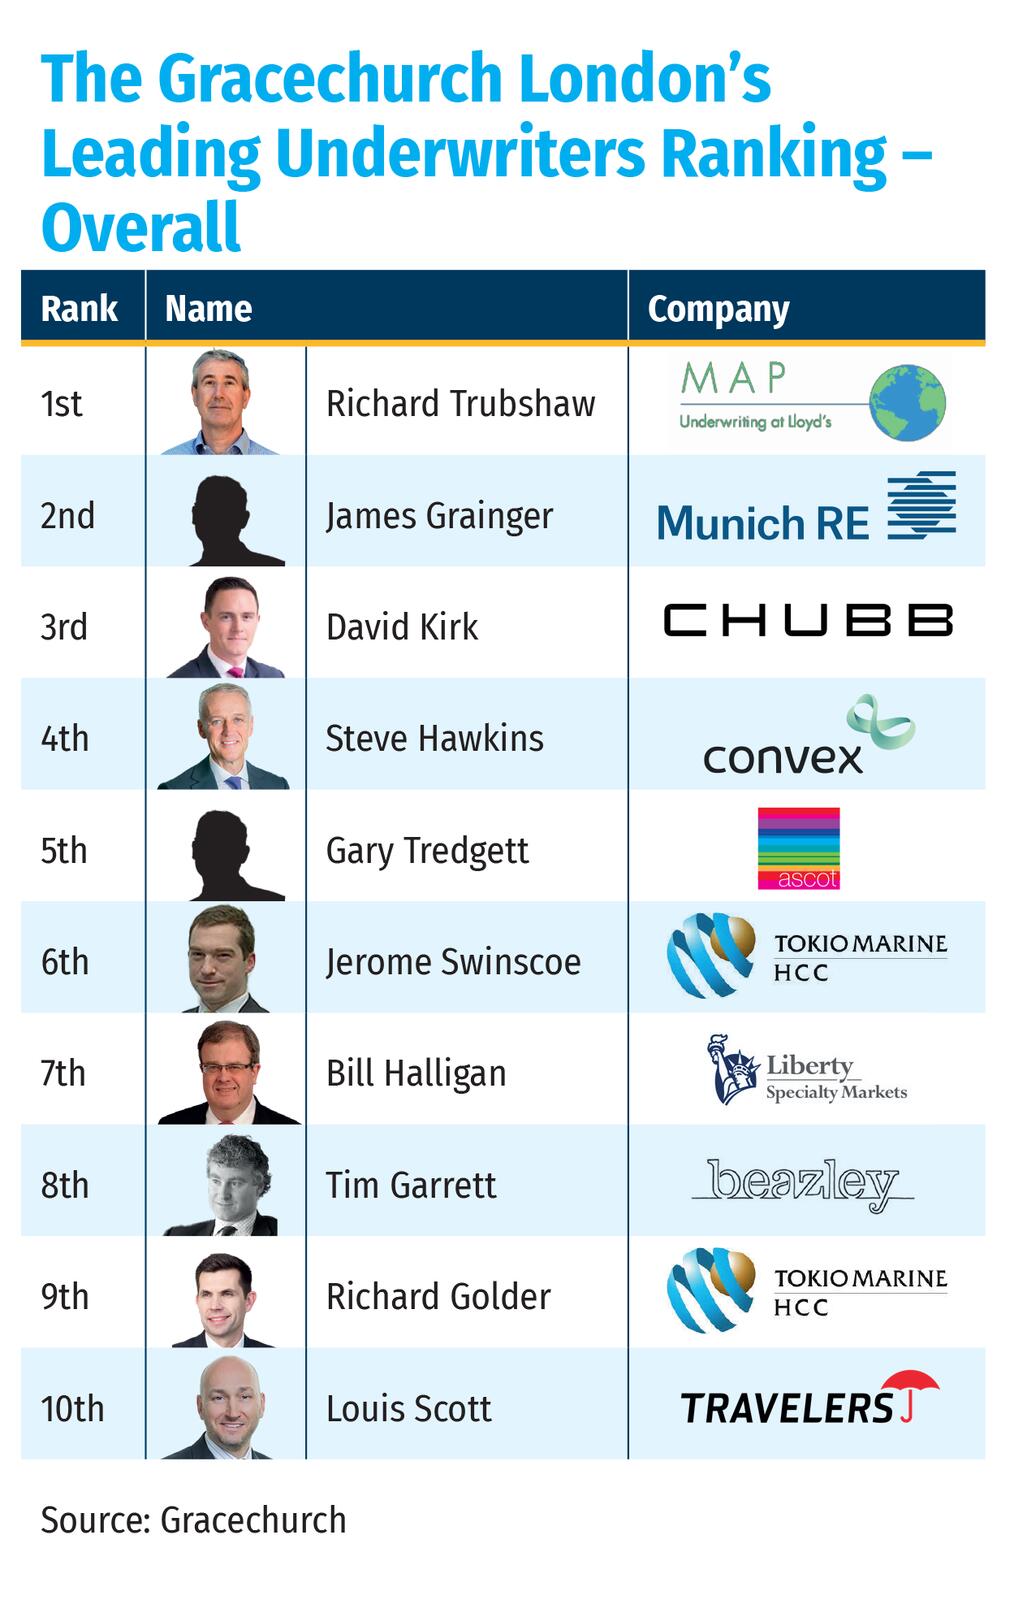 The Gracechurch London’s Leading Underwriters Ranking – Overall